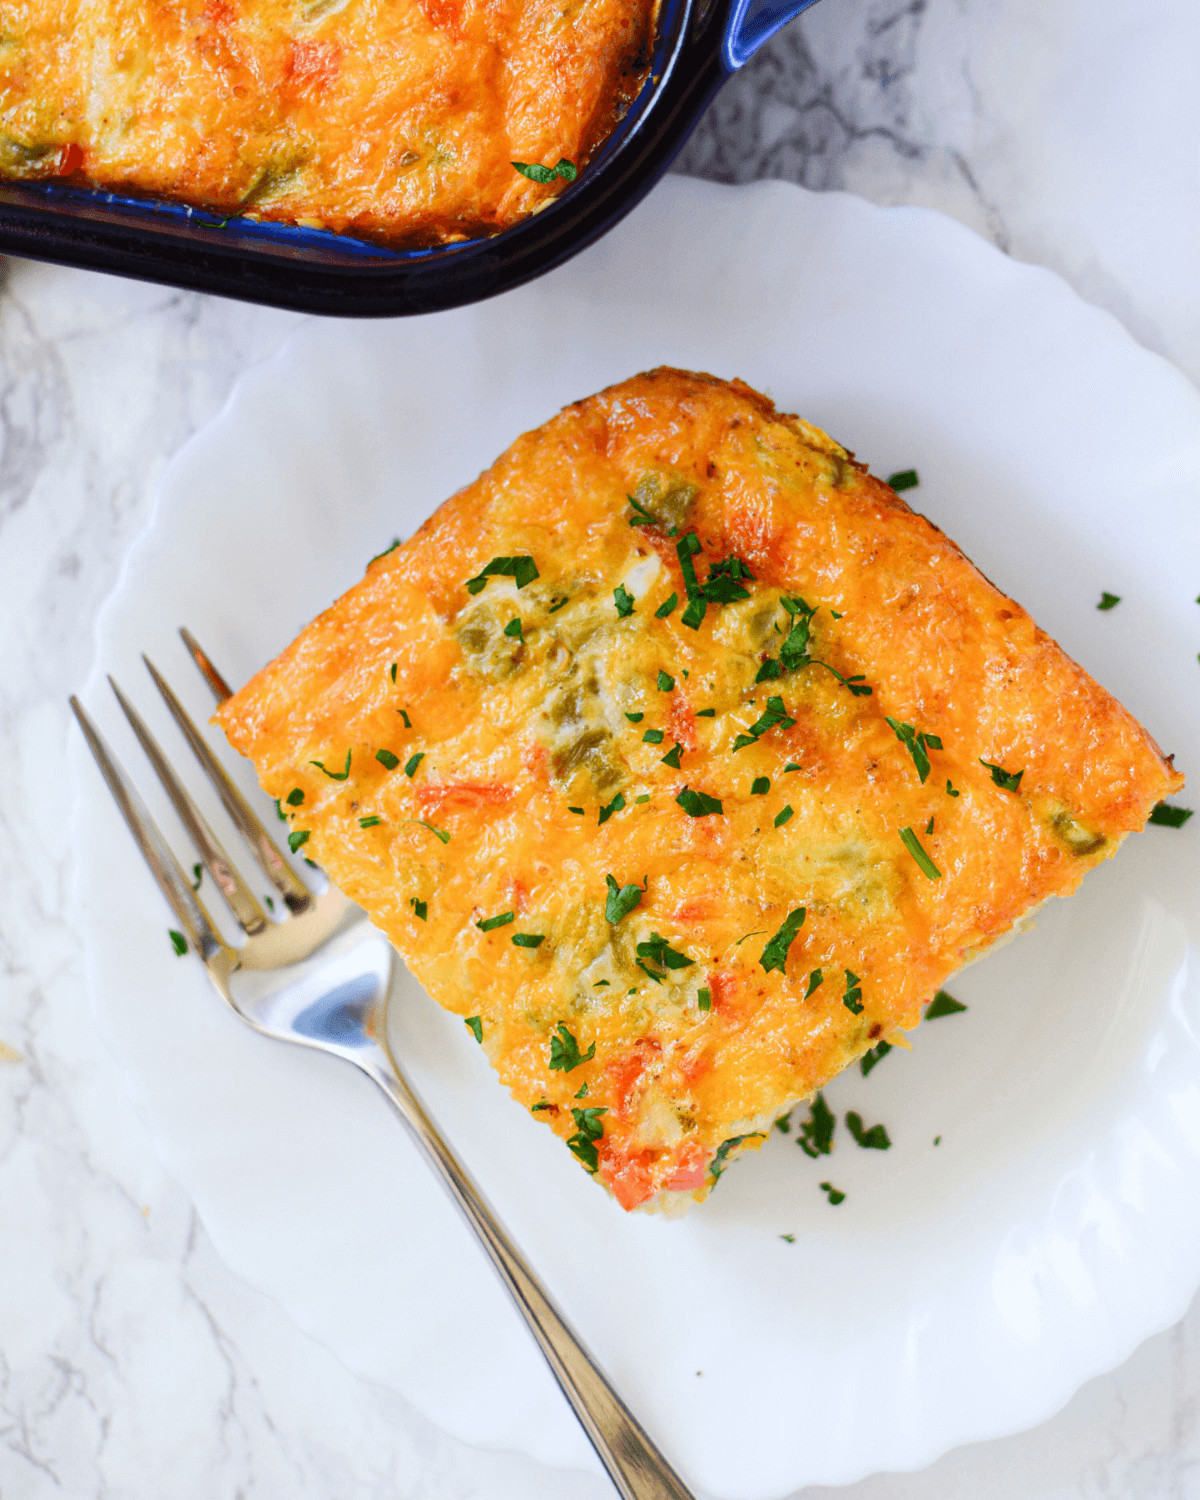 A square slice of cheesy Mexican breakfast casserole on a white plate with a fork, garnished with chopped parsley.